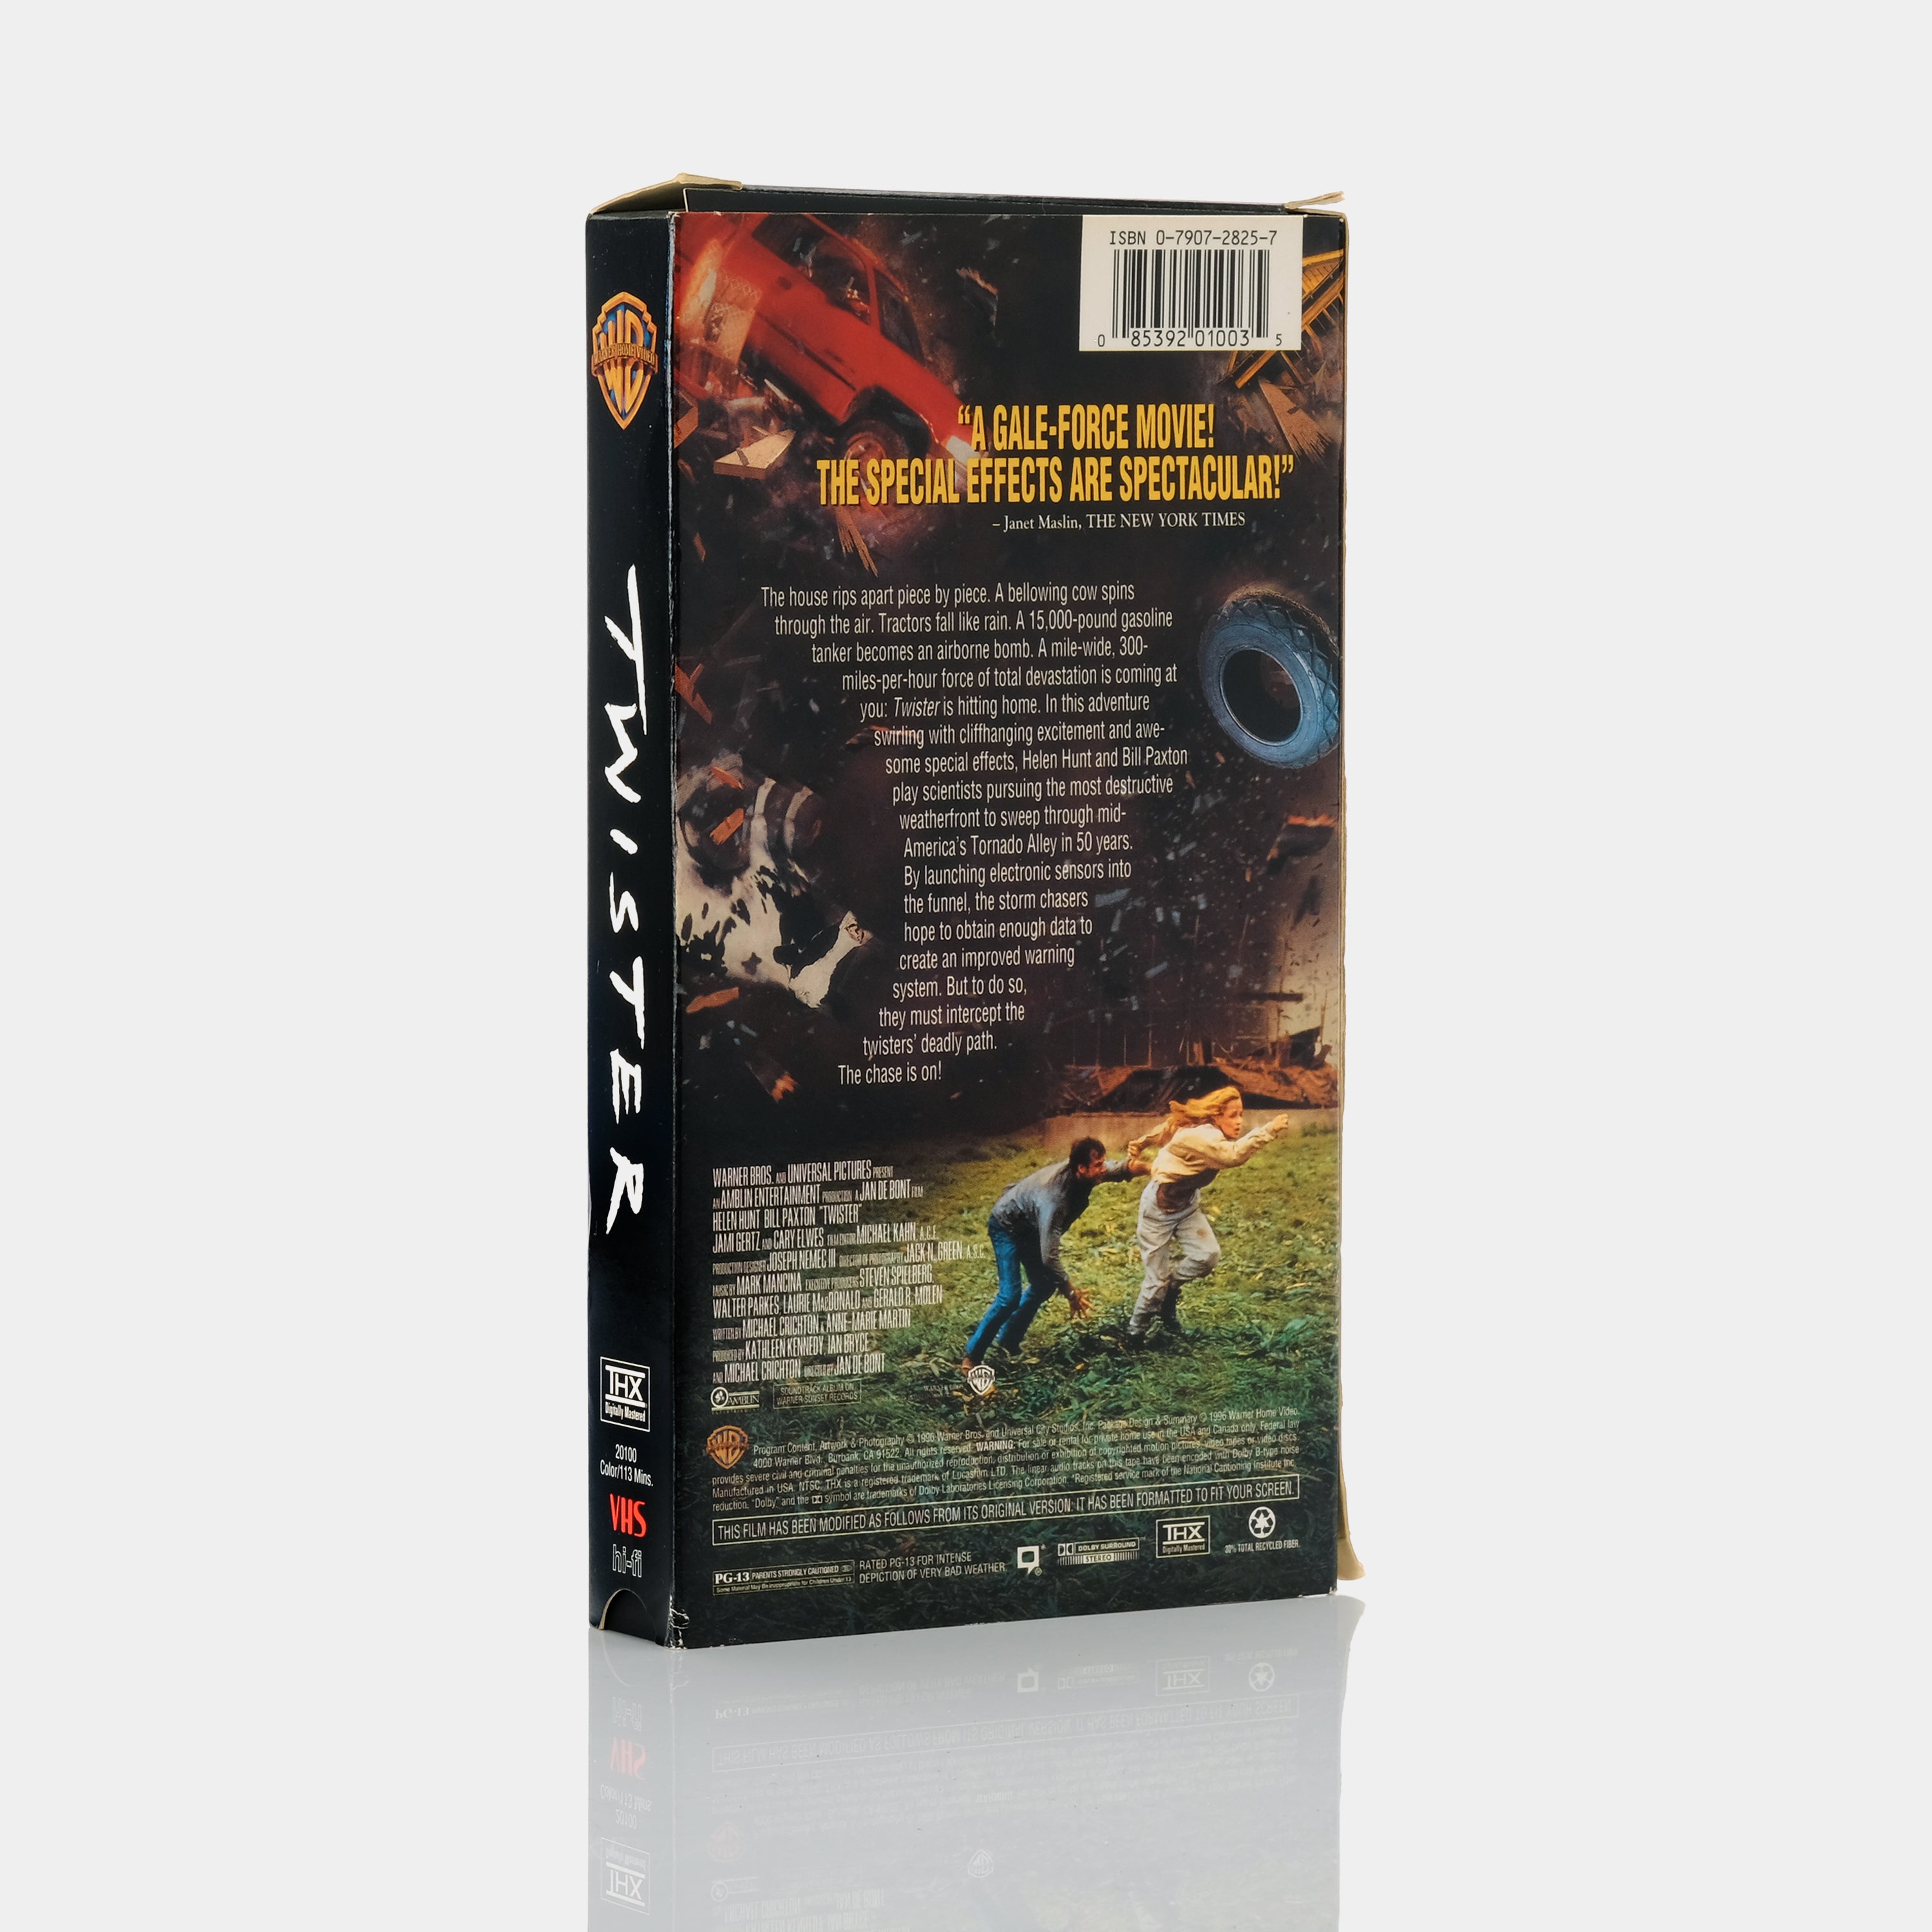 Twister VHS Tape